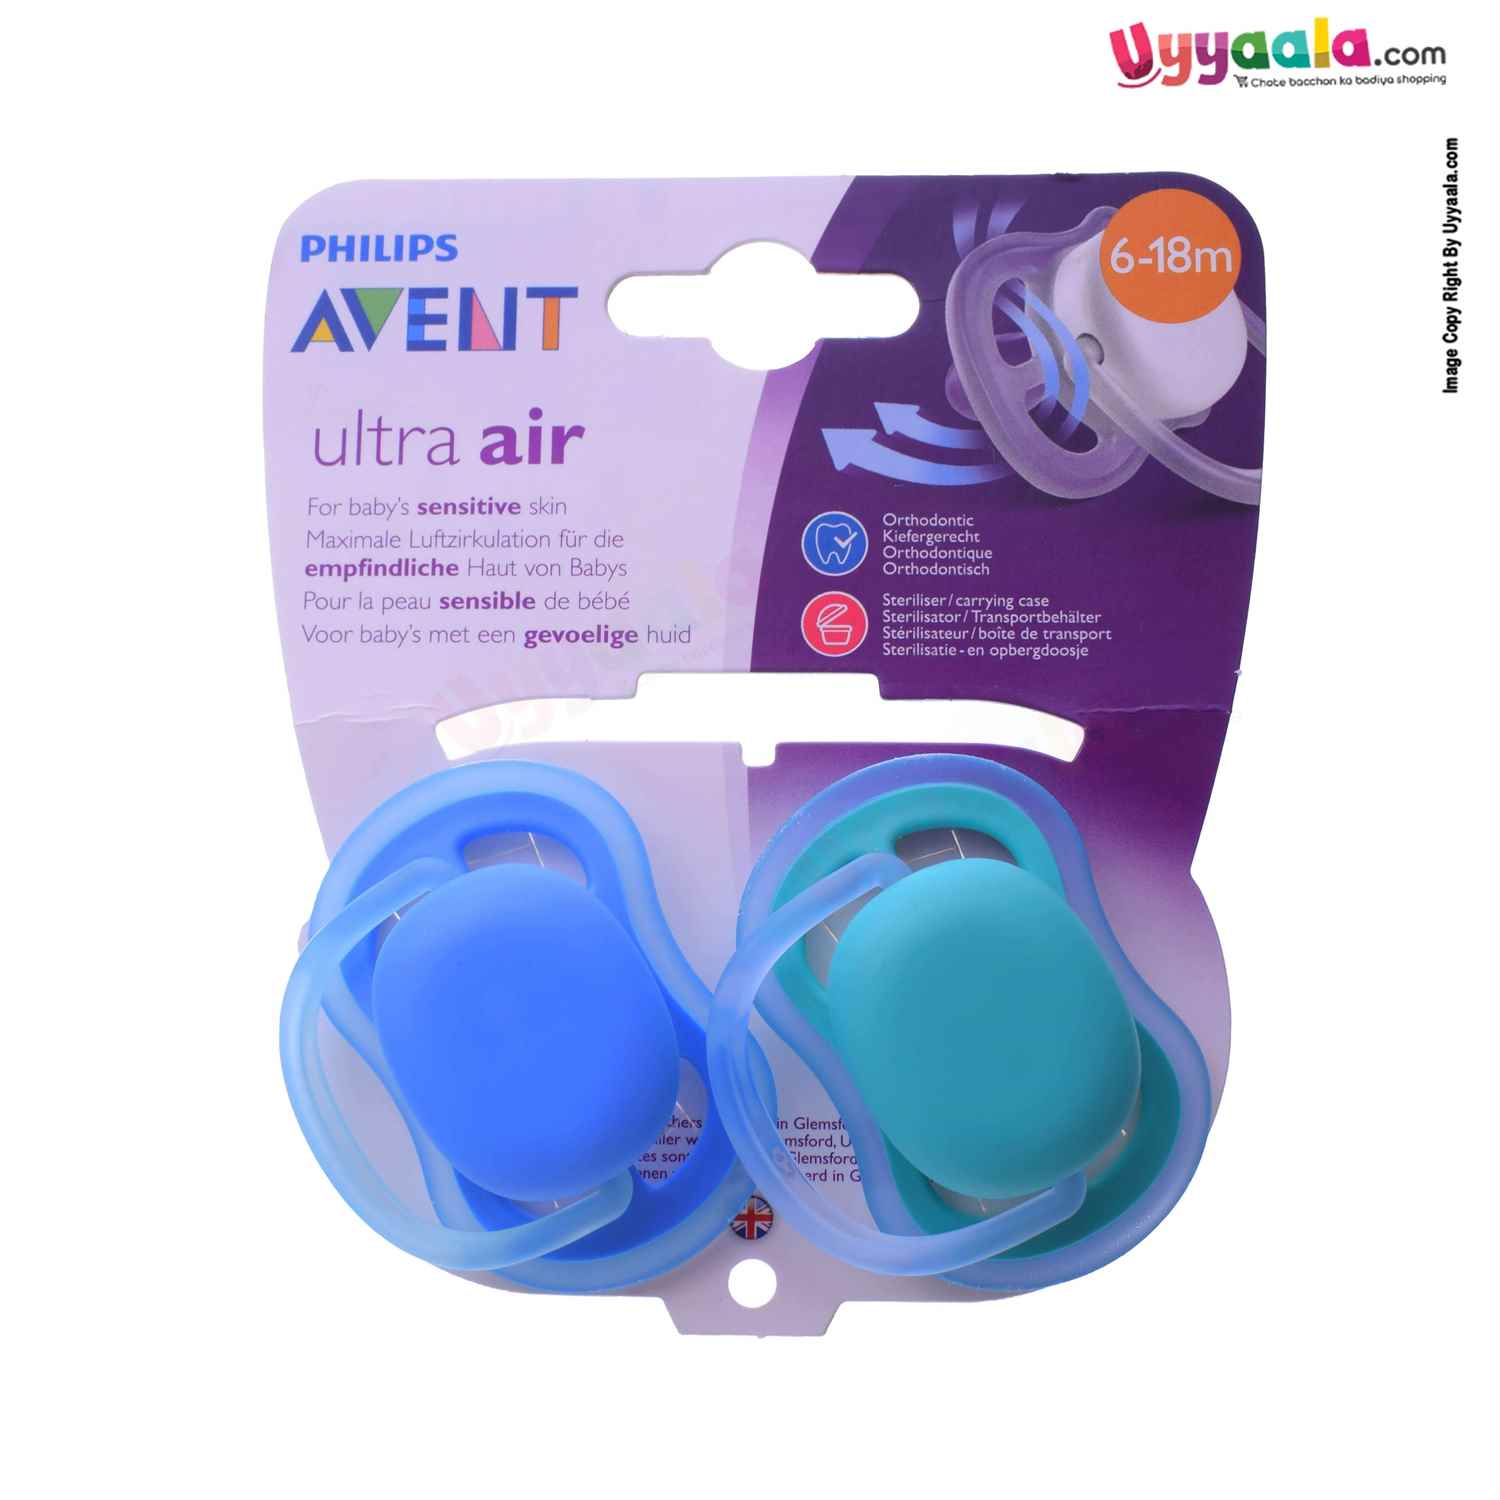 PHILIPS AVENT Extra Air Flow Soother for Babies Twin Pack 6-18m Age, Blue & Green